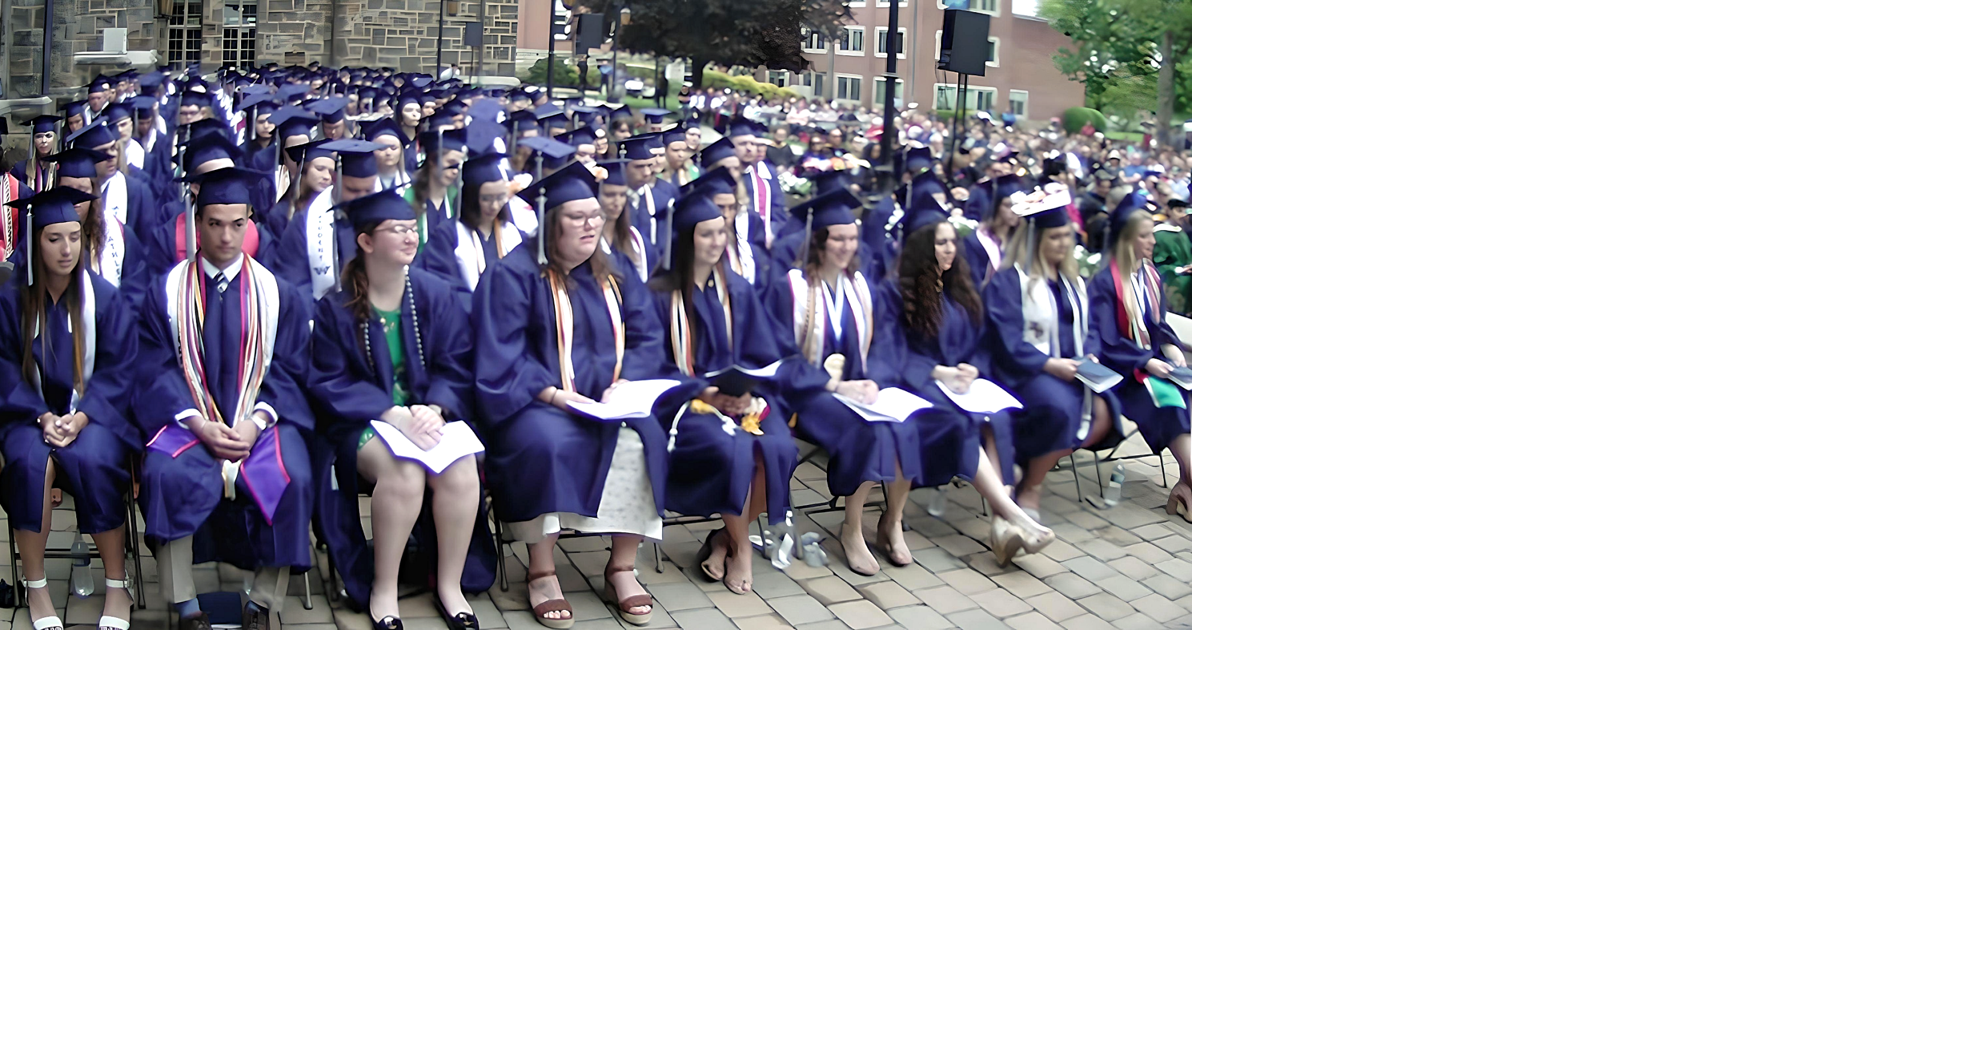 Watch It Now! 169th Westminster Commencement Our Campus